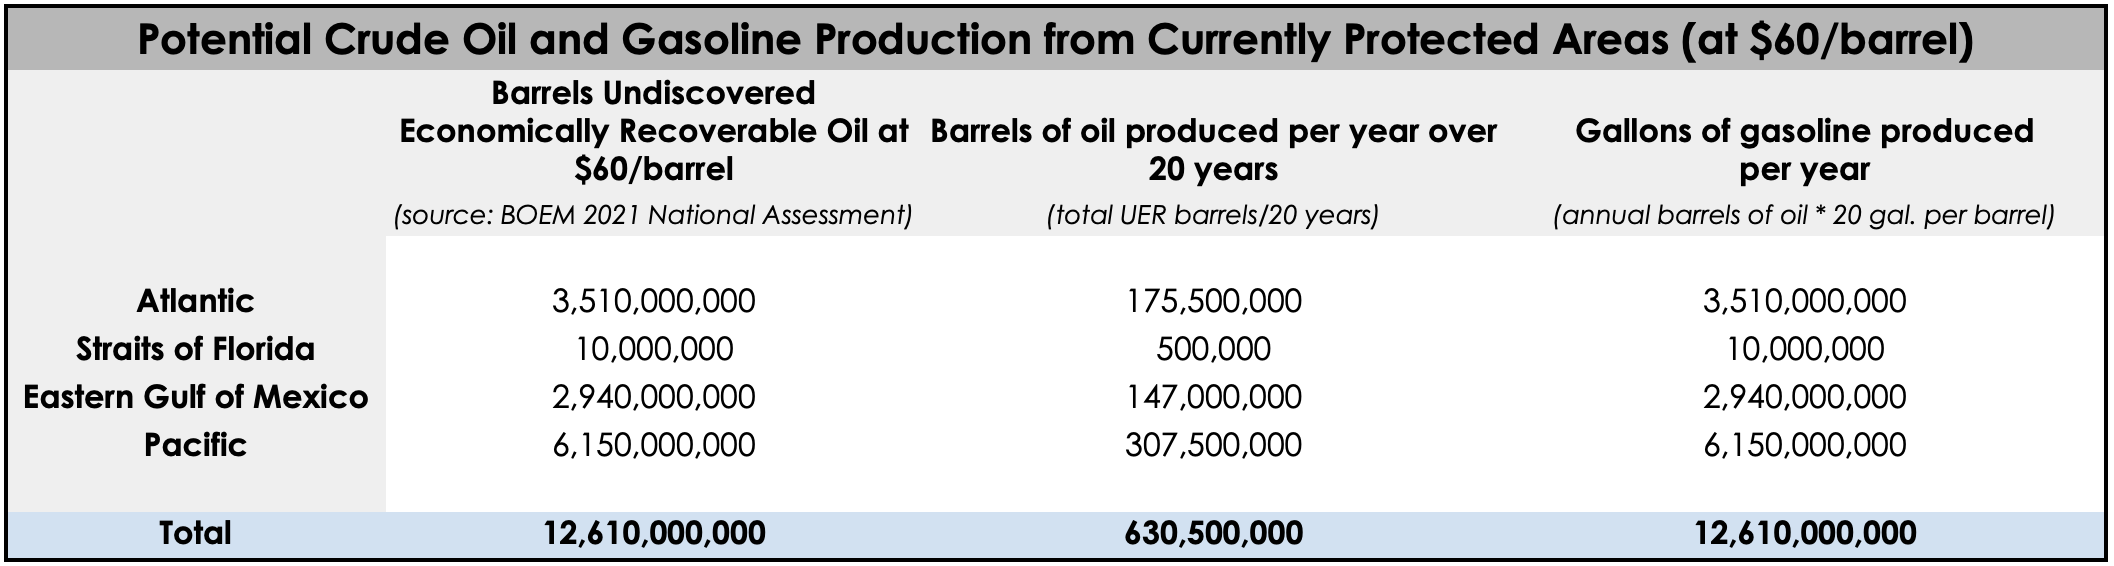 Table showing potential gasoline production from currently-protected offshore areas at $60 per barrel.